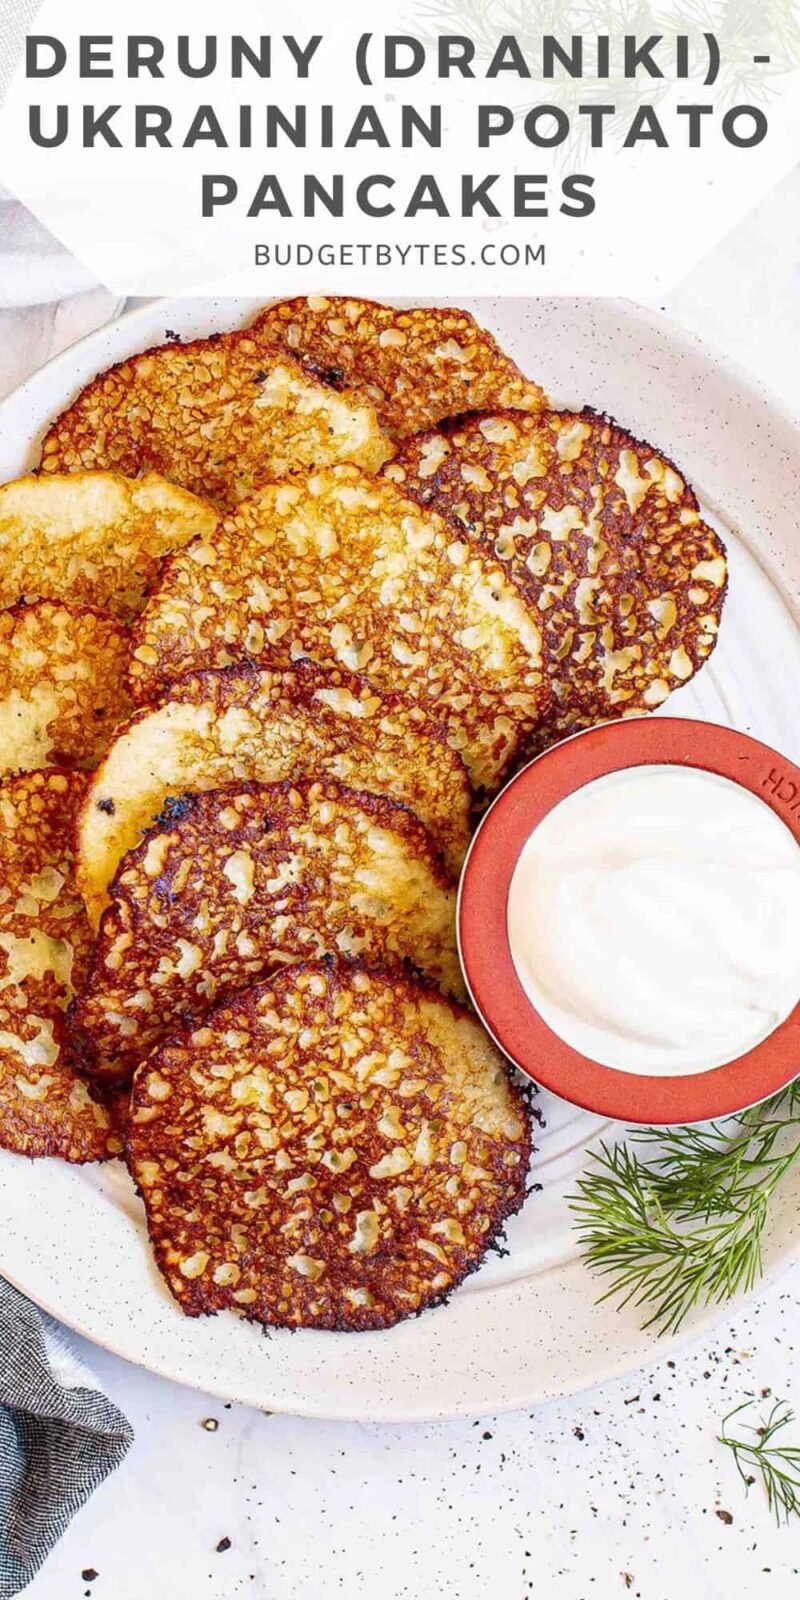 Overhead view of a plate full of potato pancakes.